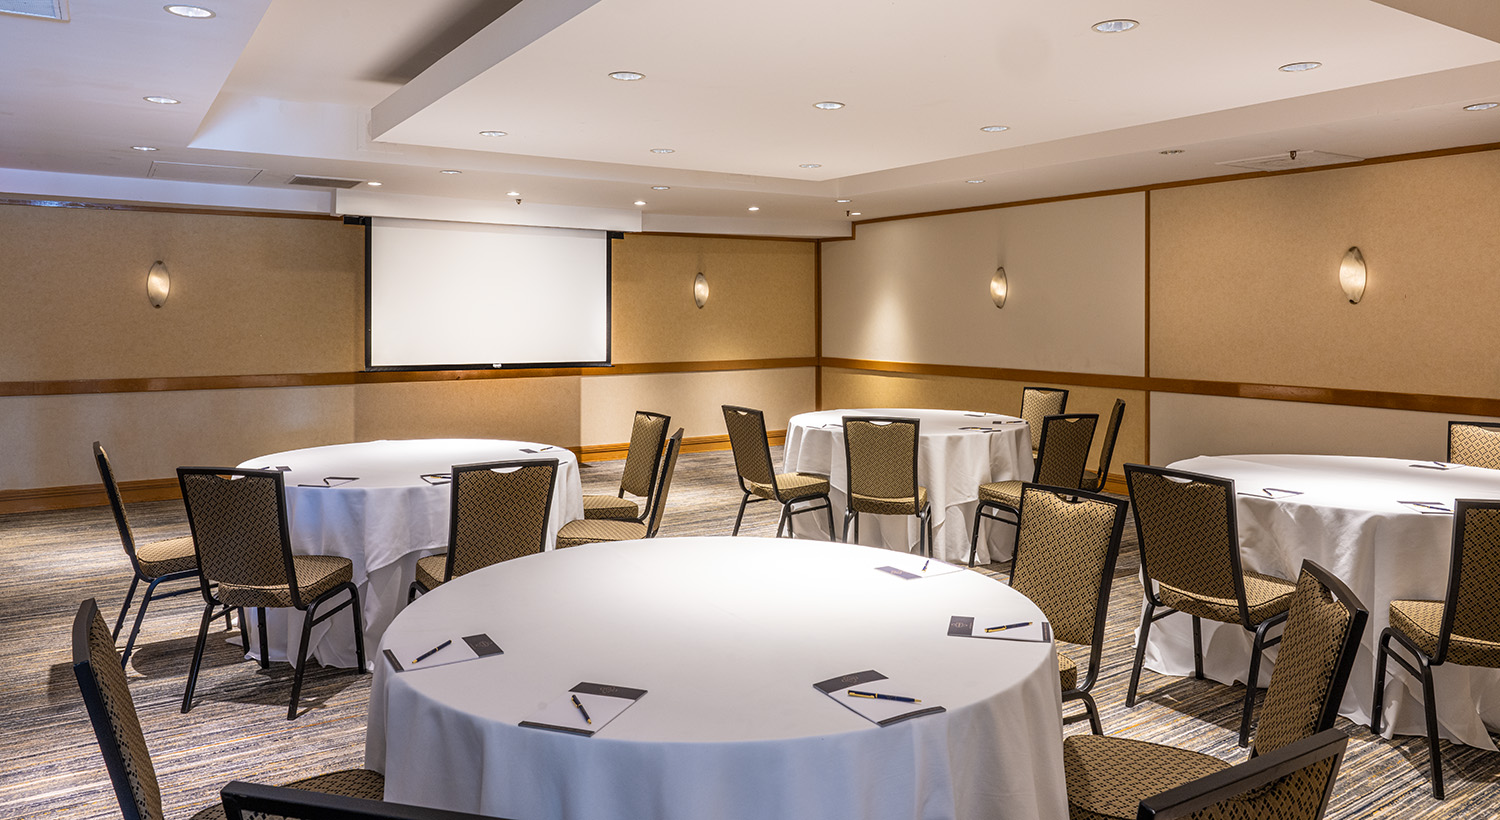 Peninsula conference room event space for bay area events at Grand Bay Hotel San Francisco